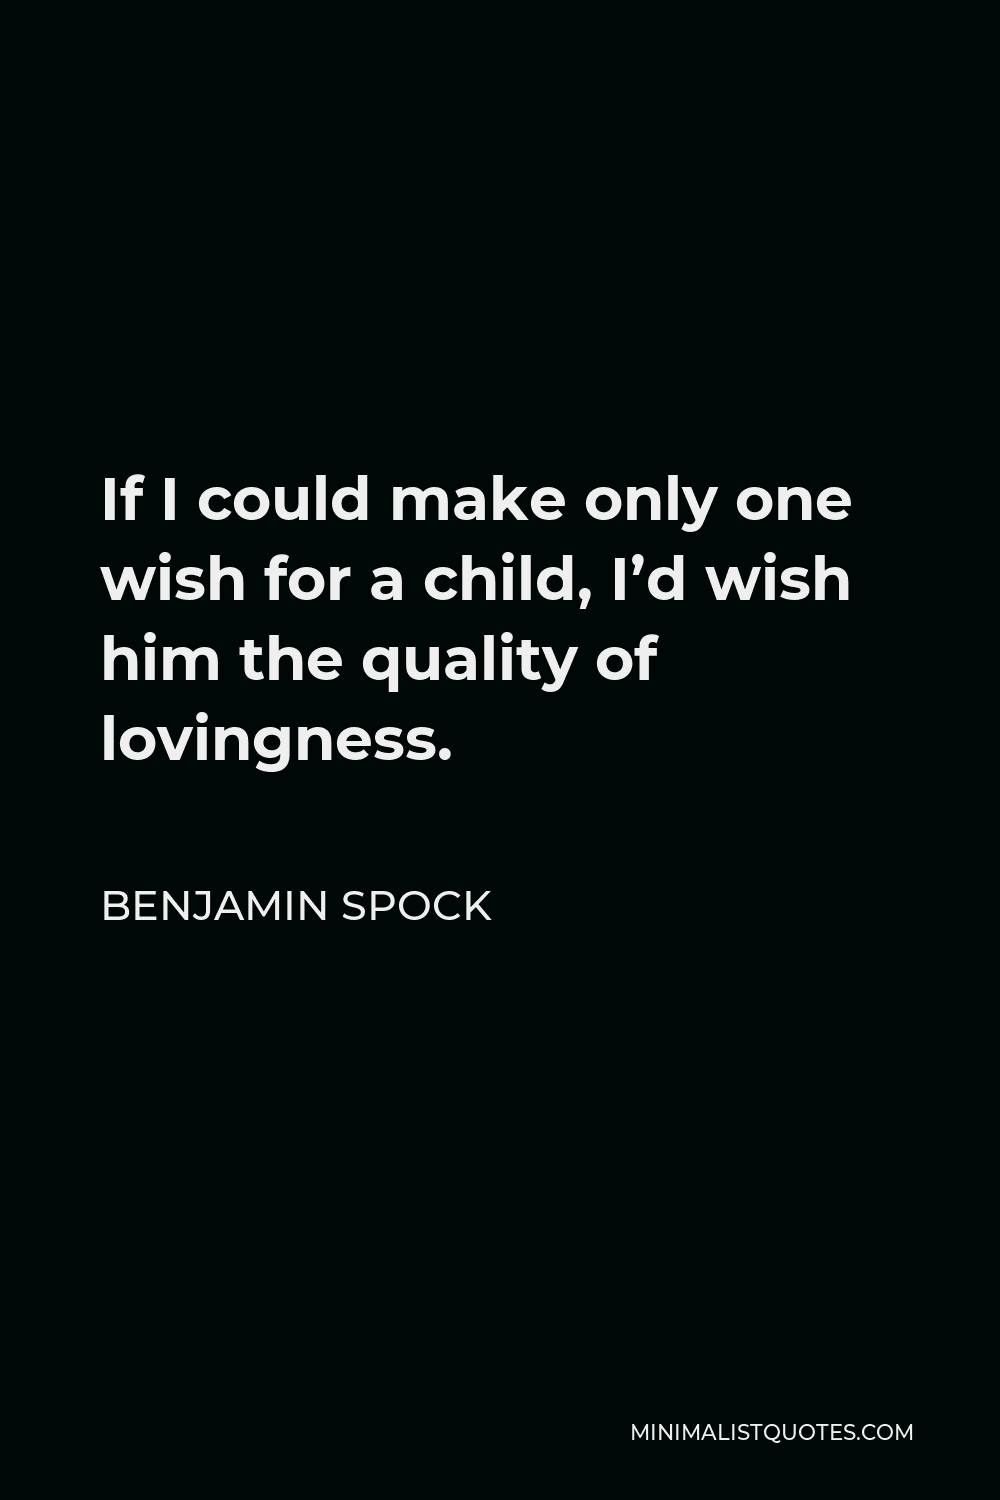 Benjamin Spock Quote - If I could make only one wish for a child, I’d wish him the quality of lovingness.